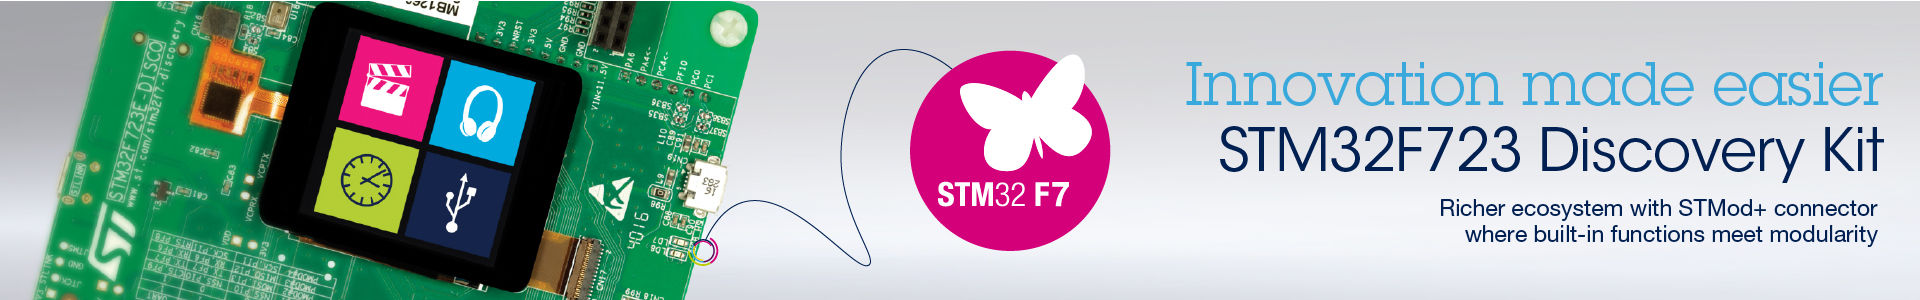 STM32F723 Discovery Kit